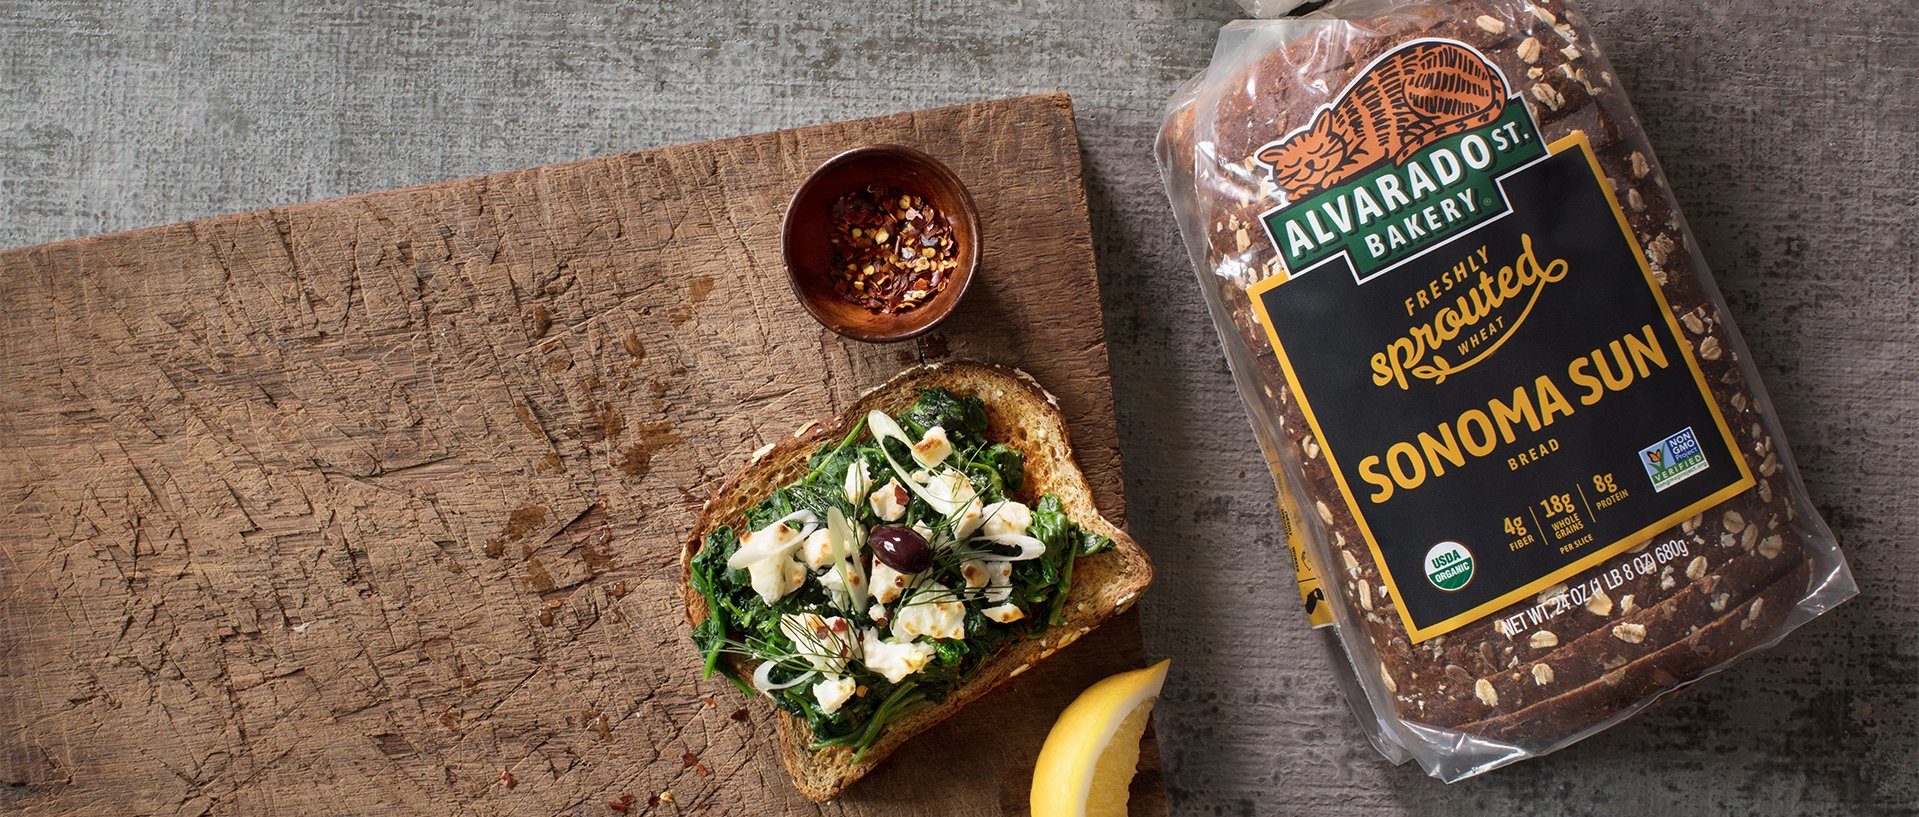 Package of Sonoma Sun Alvarado Street Bakery bread next to a cutting board with an open-faced sandwich on top